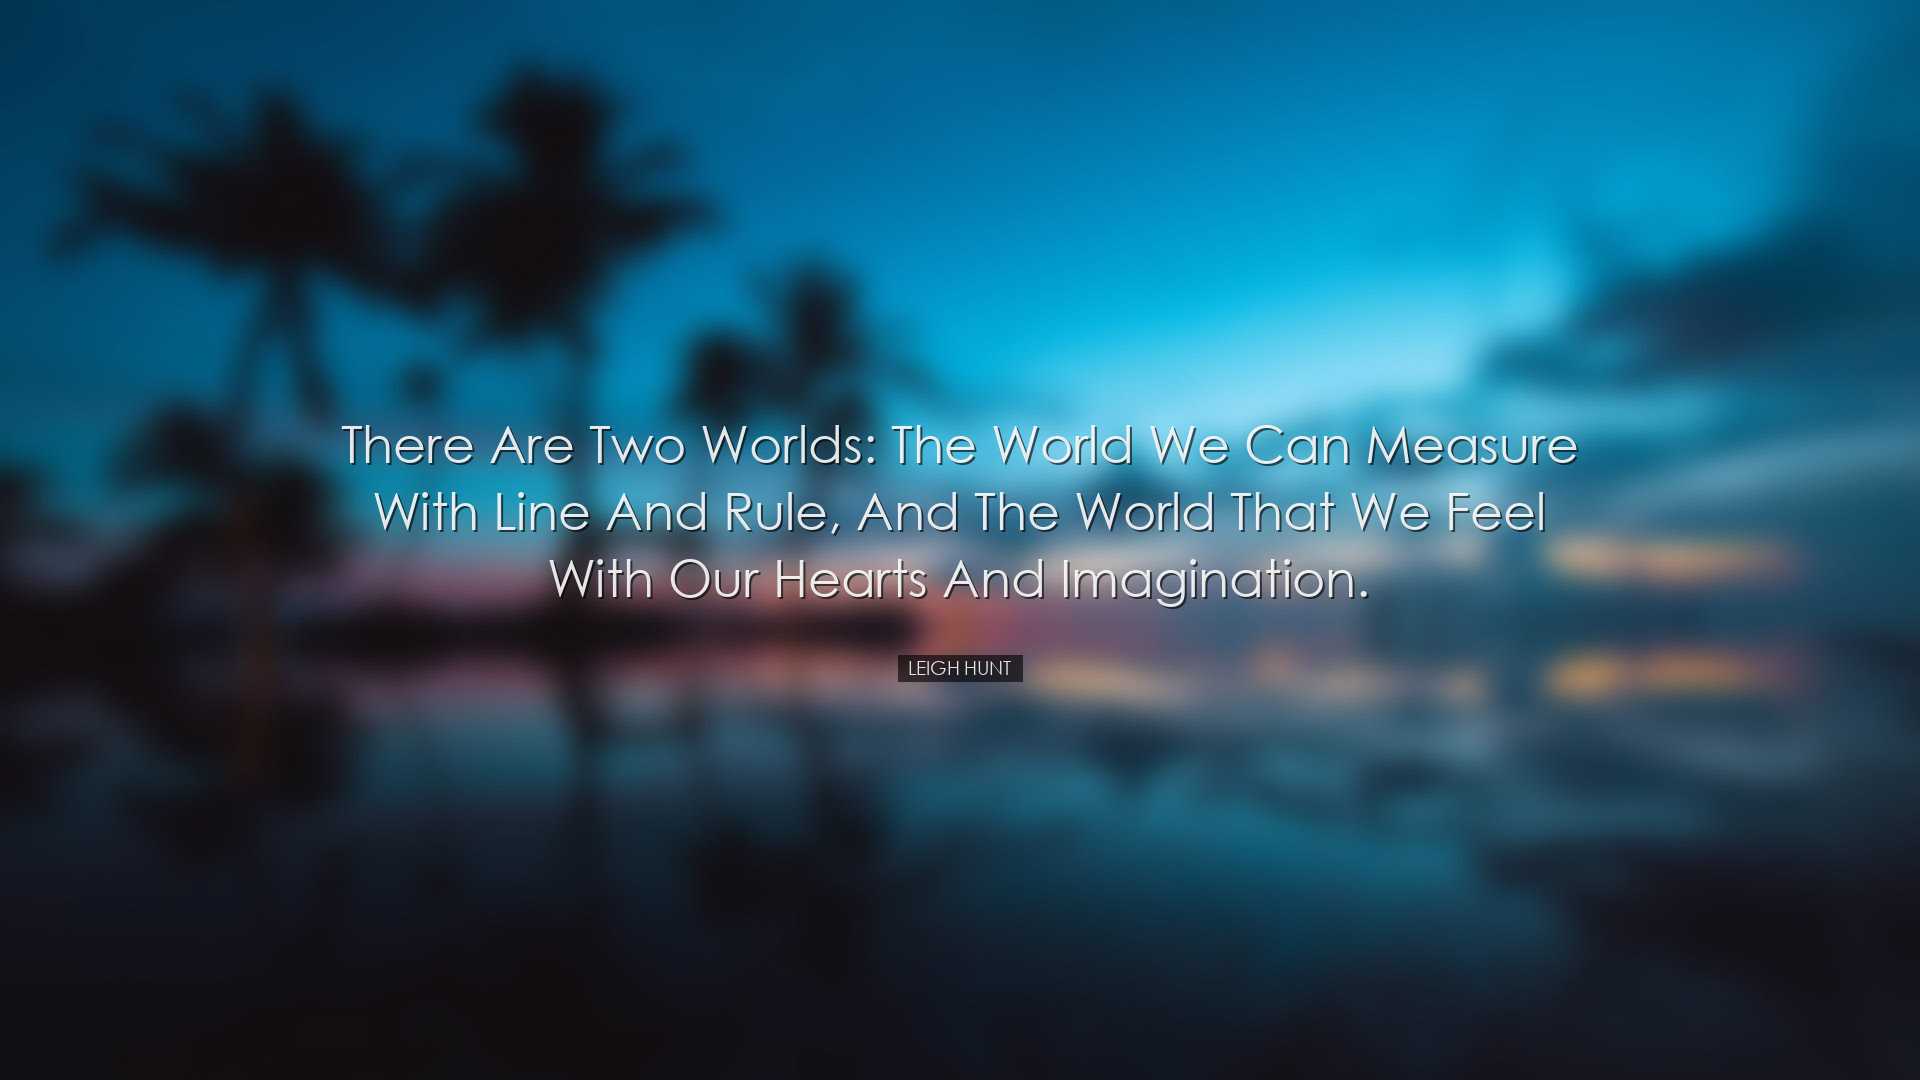 There are two worlds: the world we can measure with line and rule,